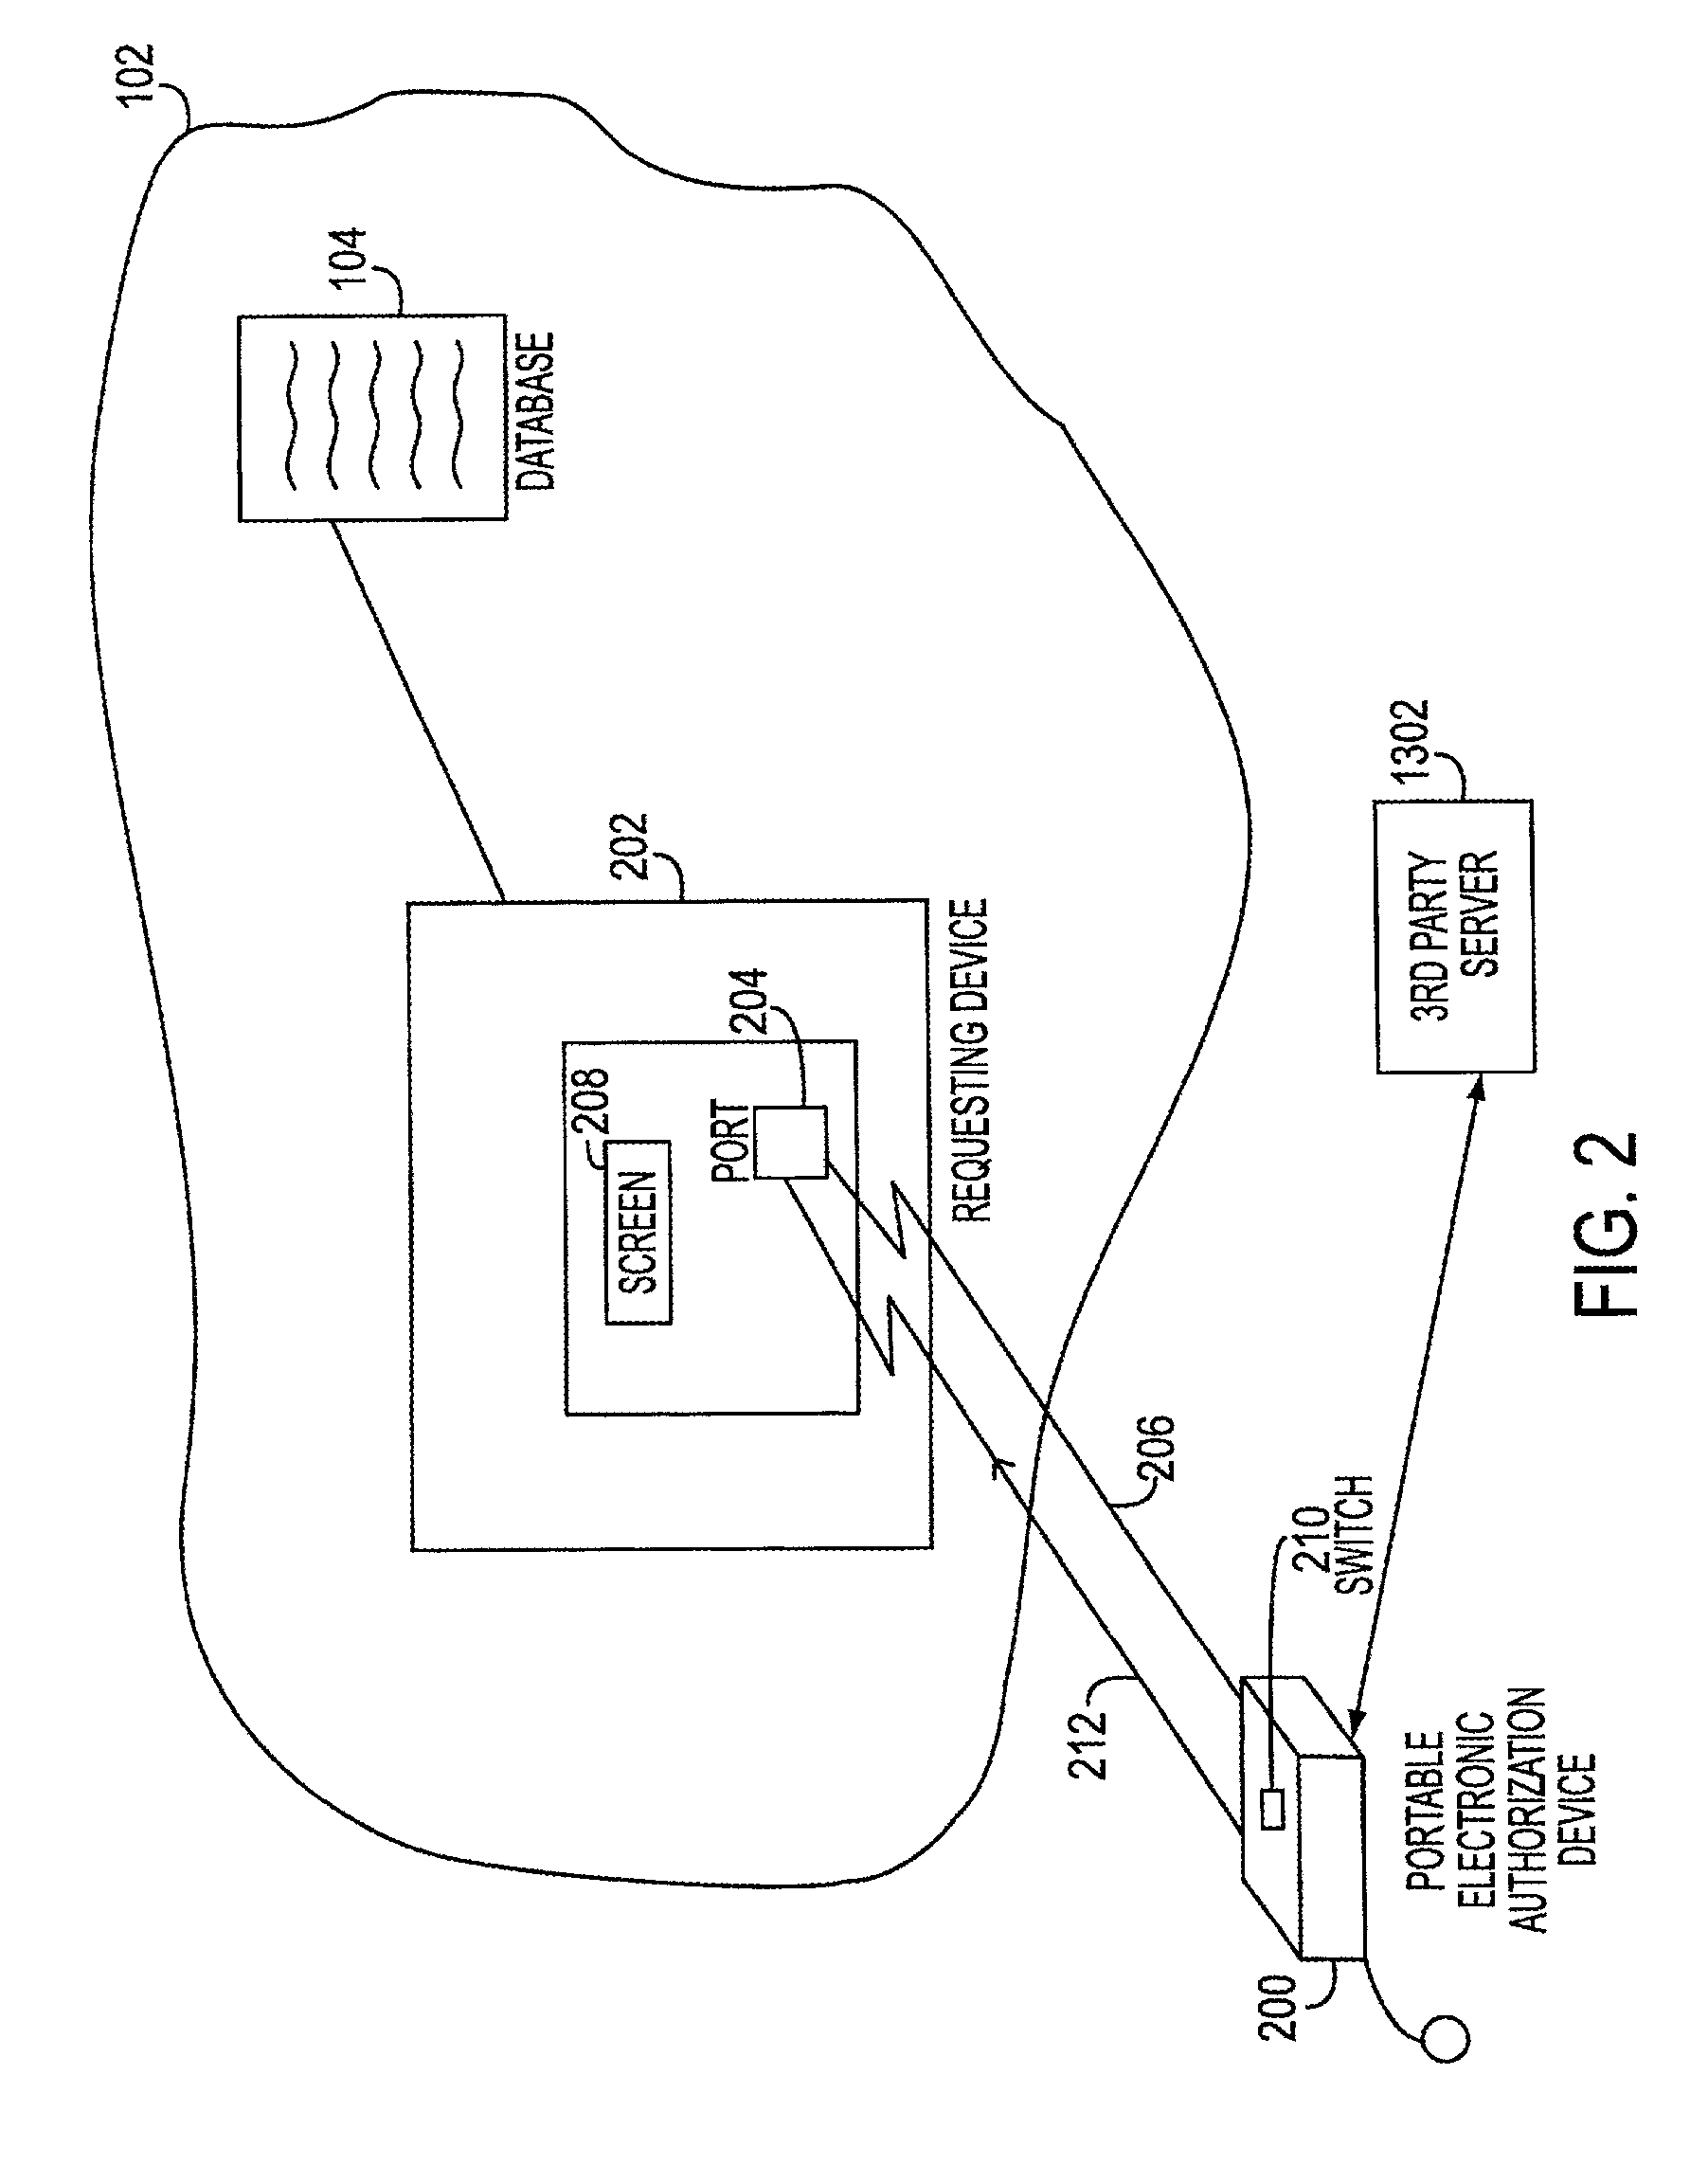 Electronic transaction systems and methods therfeor